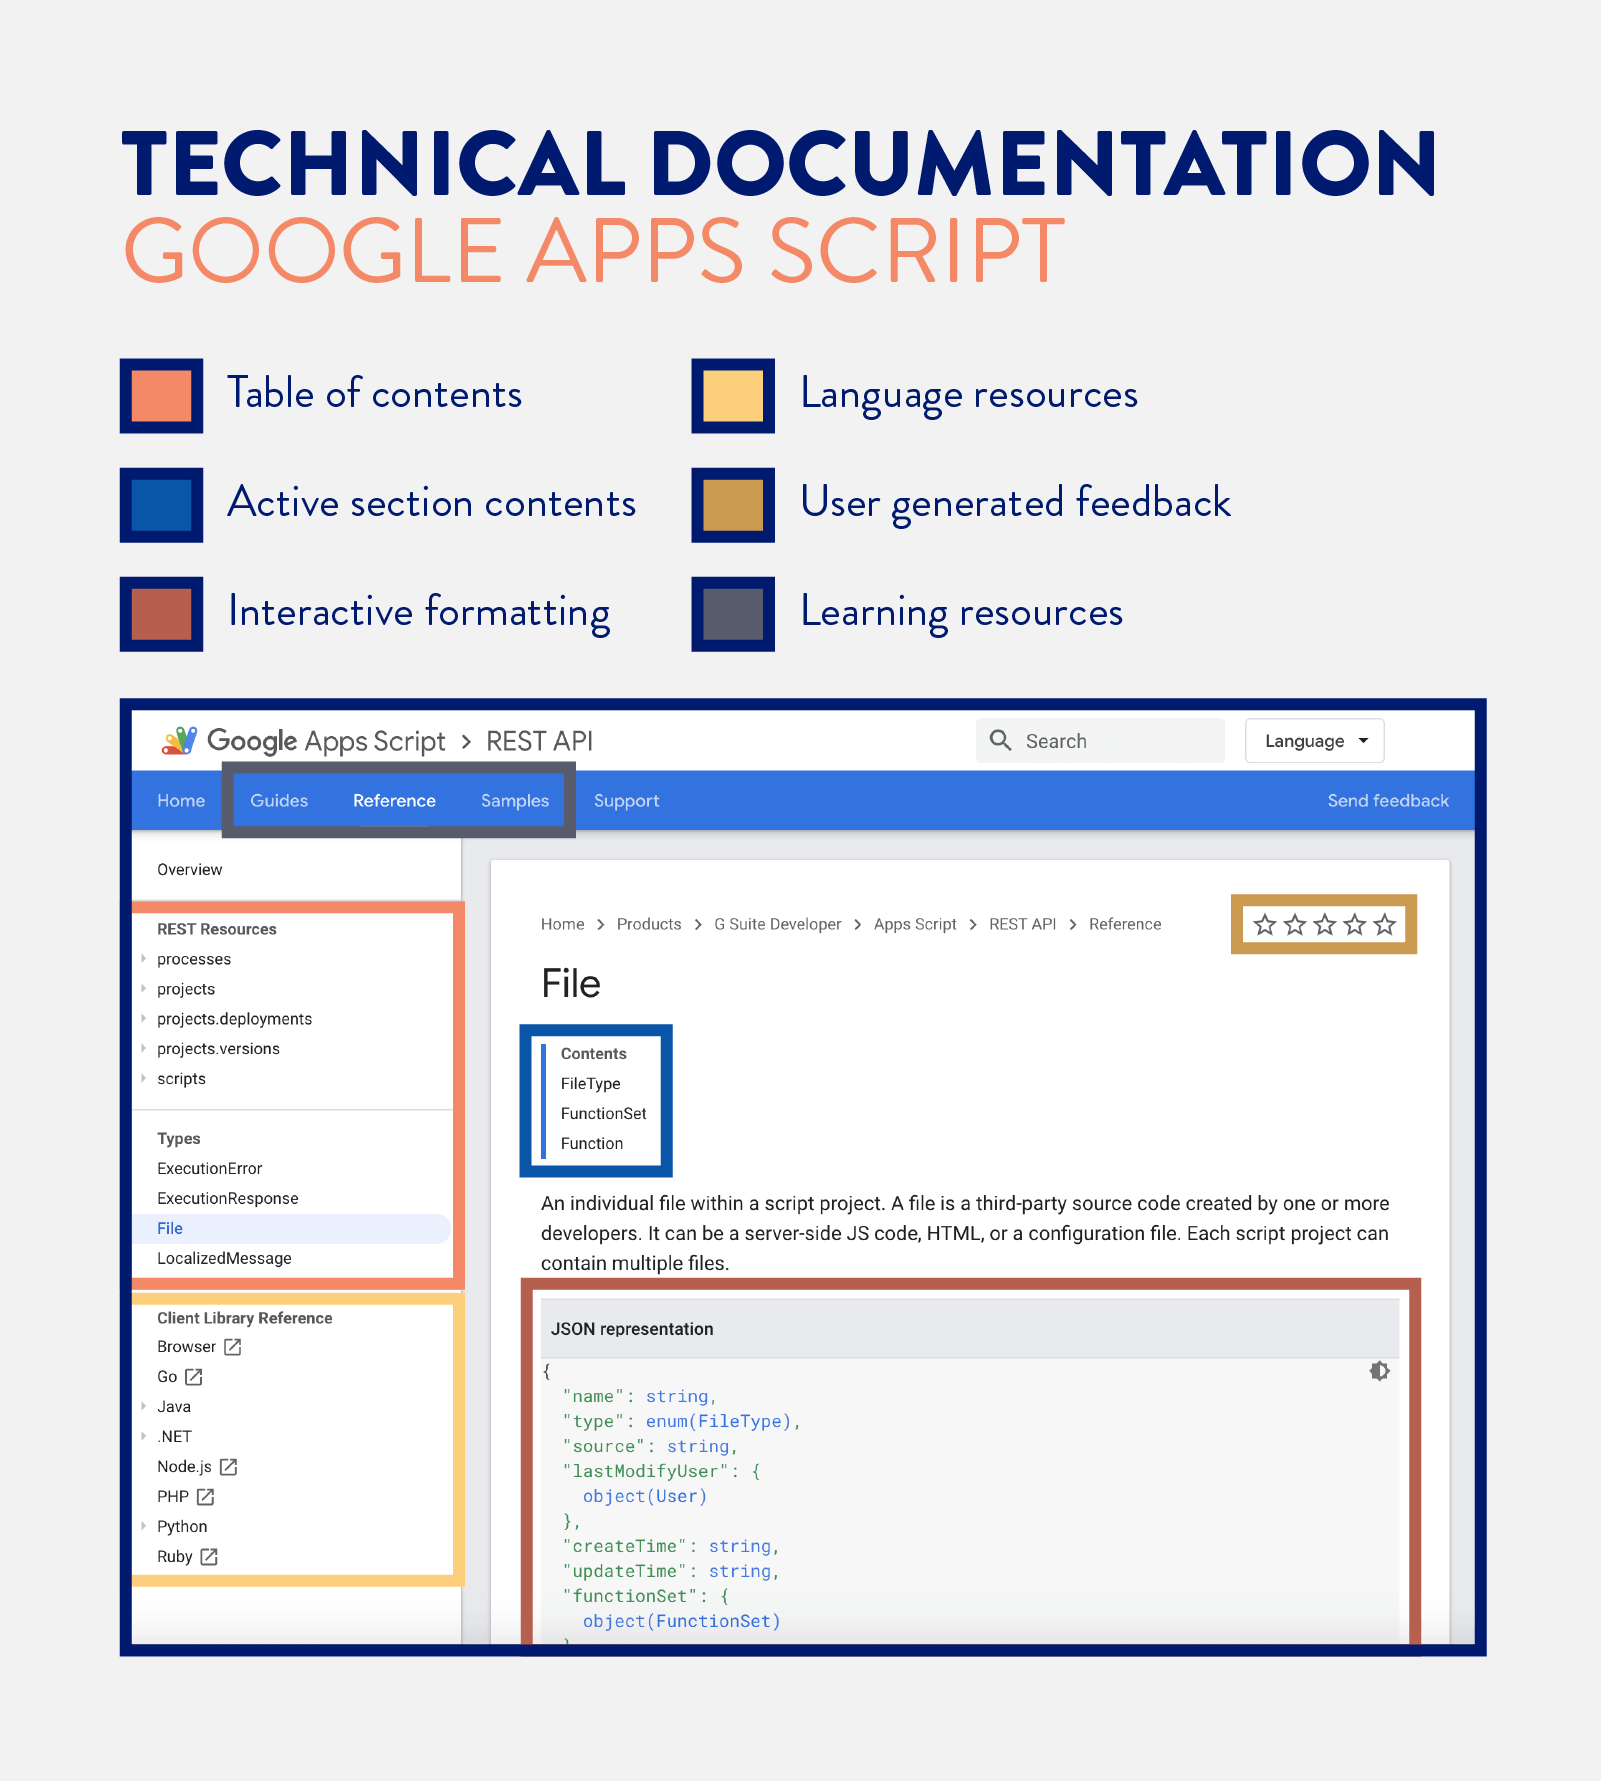 technical documentation example from Google's App Script